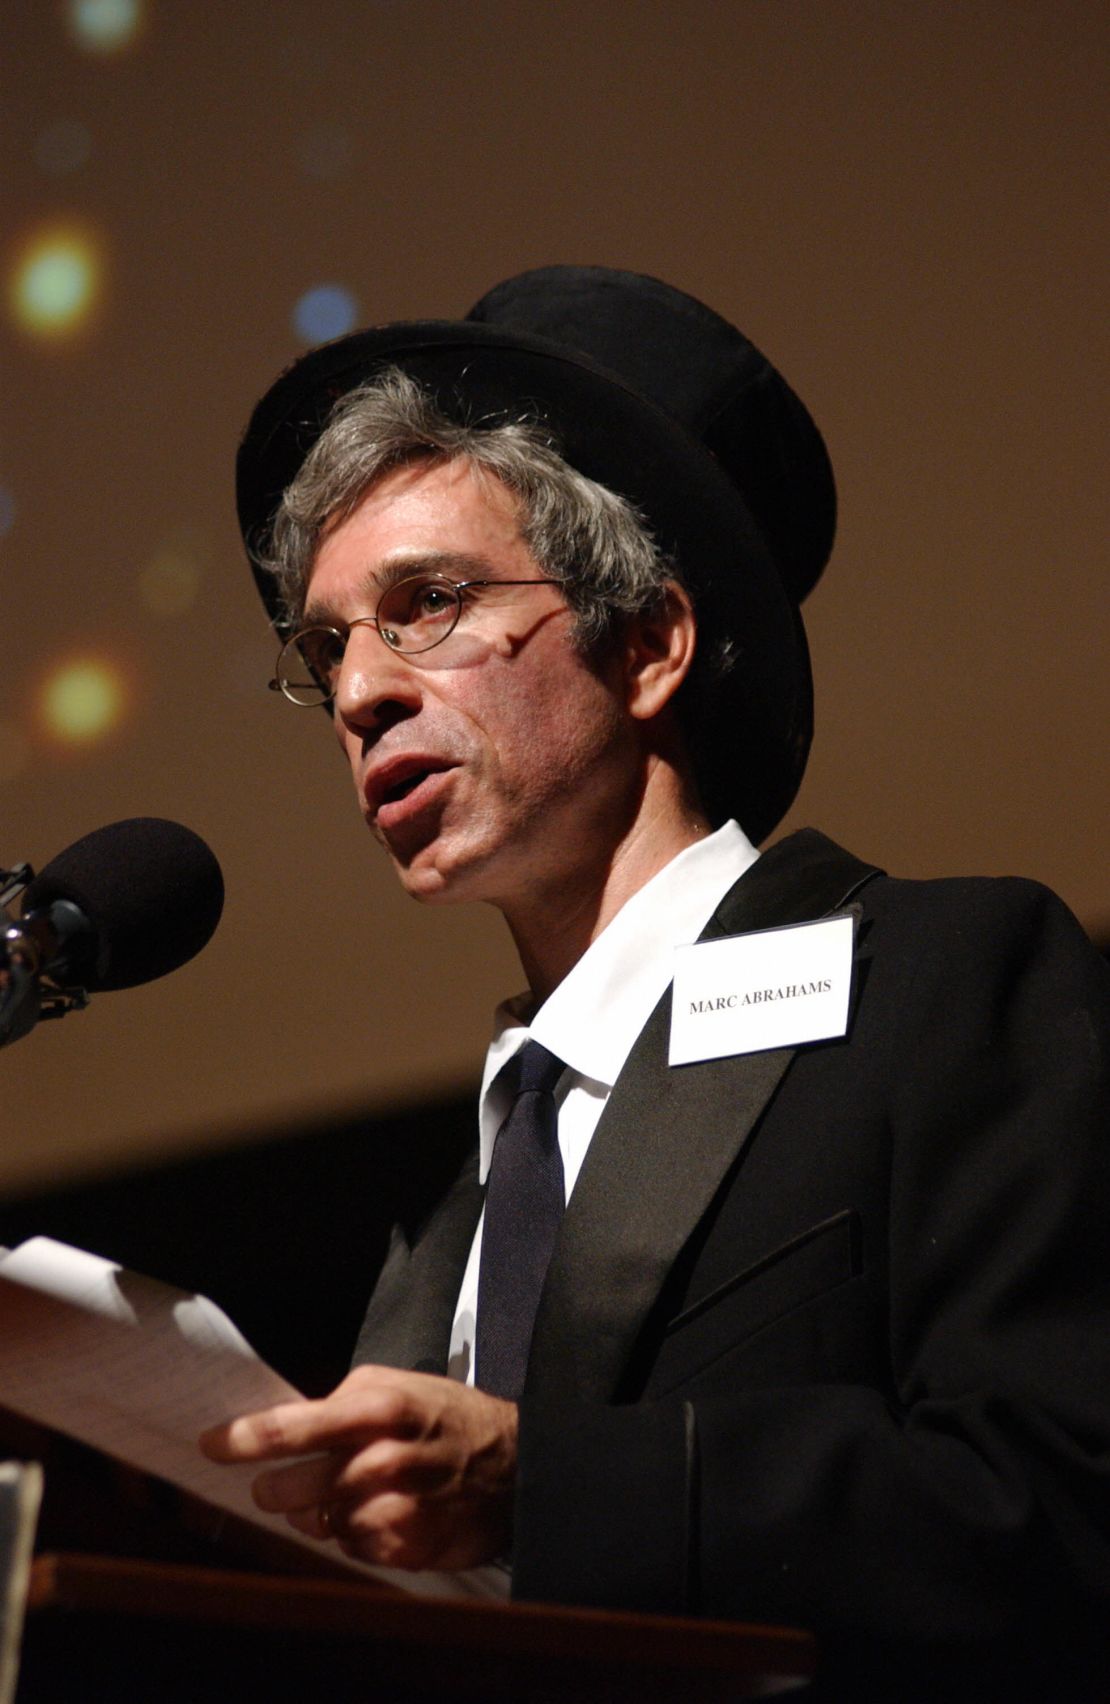 Marc Abrahams at the Ig Nobel prize-giving ceremony